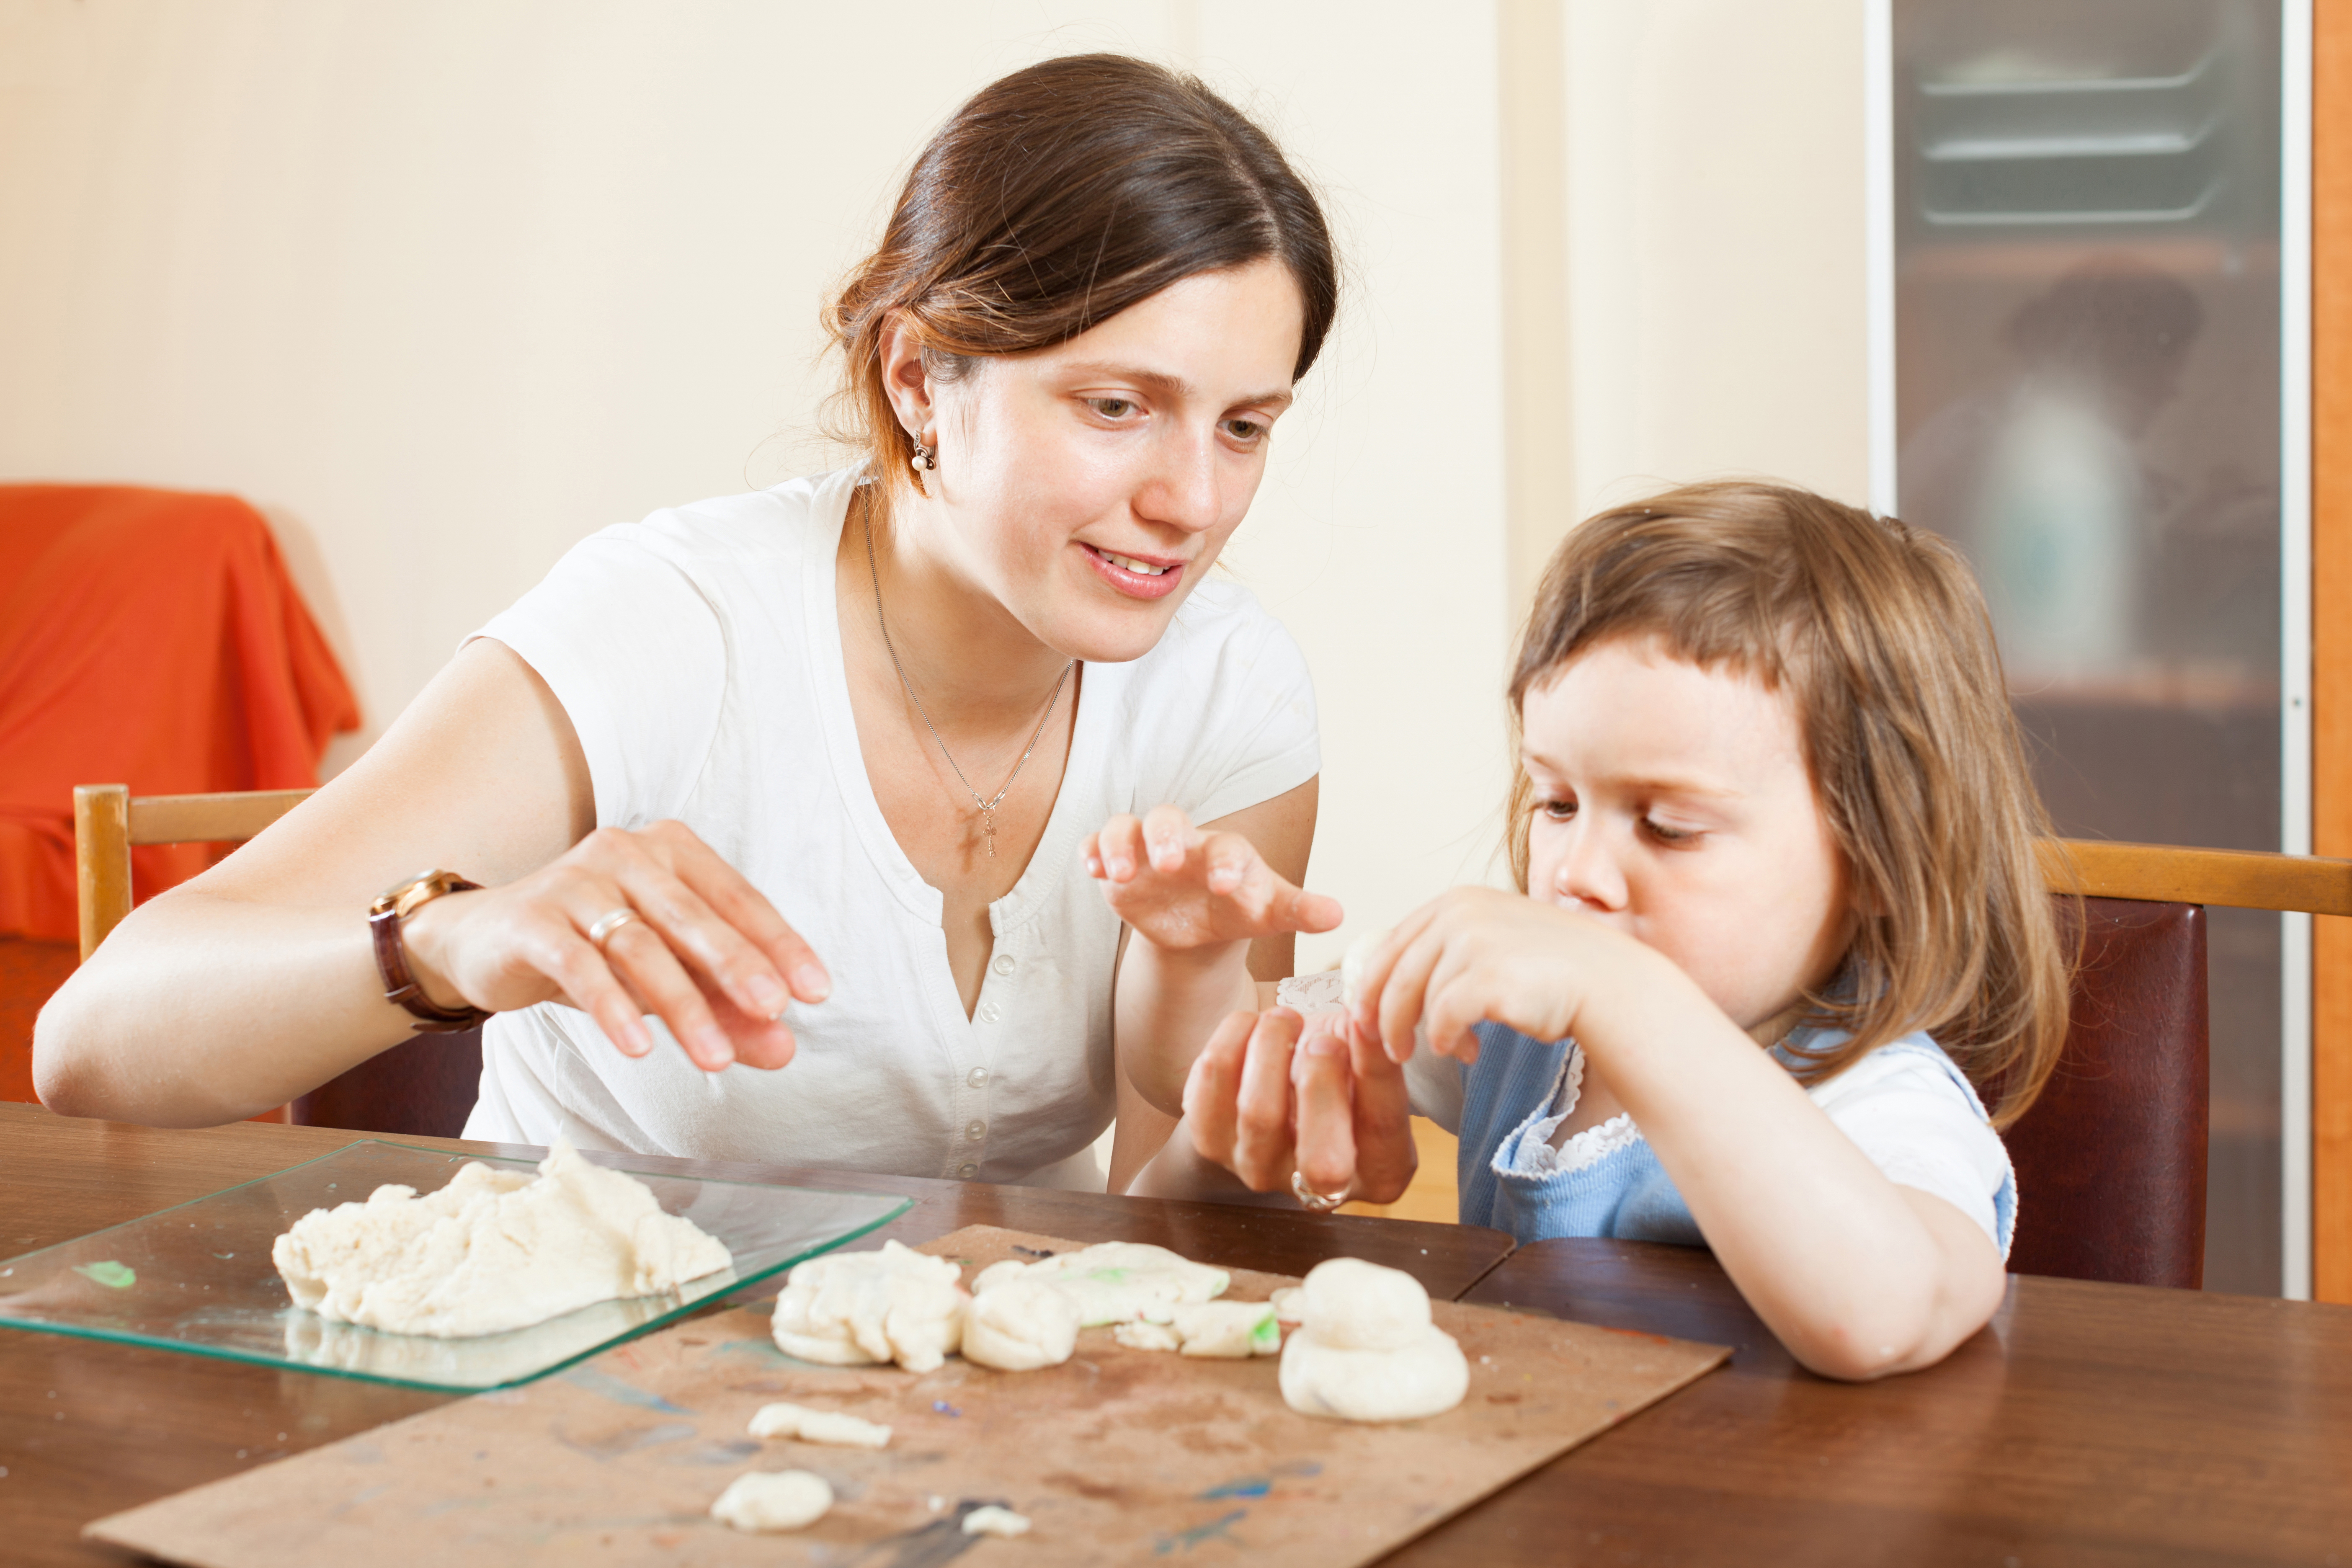 Happy mother and baby sculpting from plasticine or dough in home interior